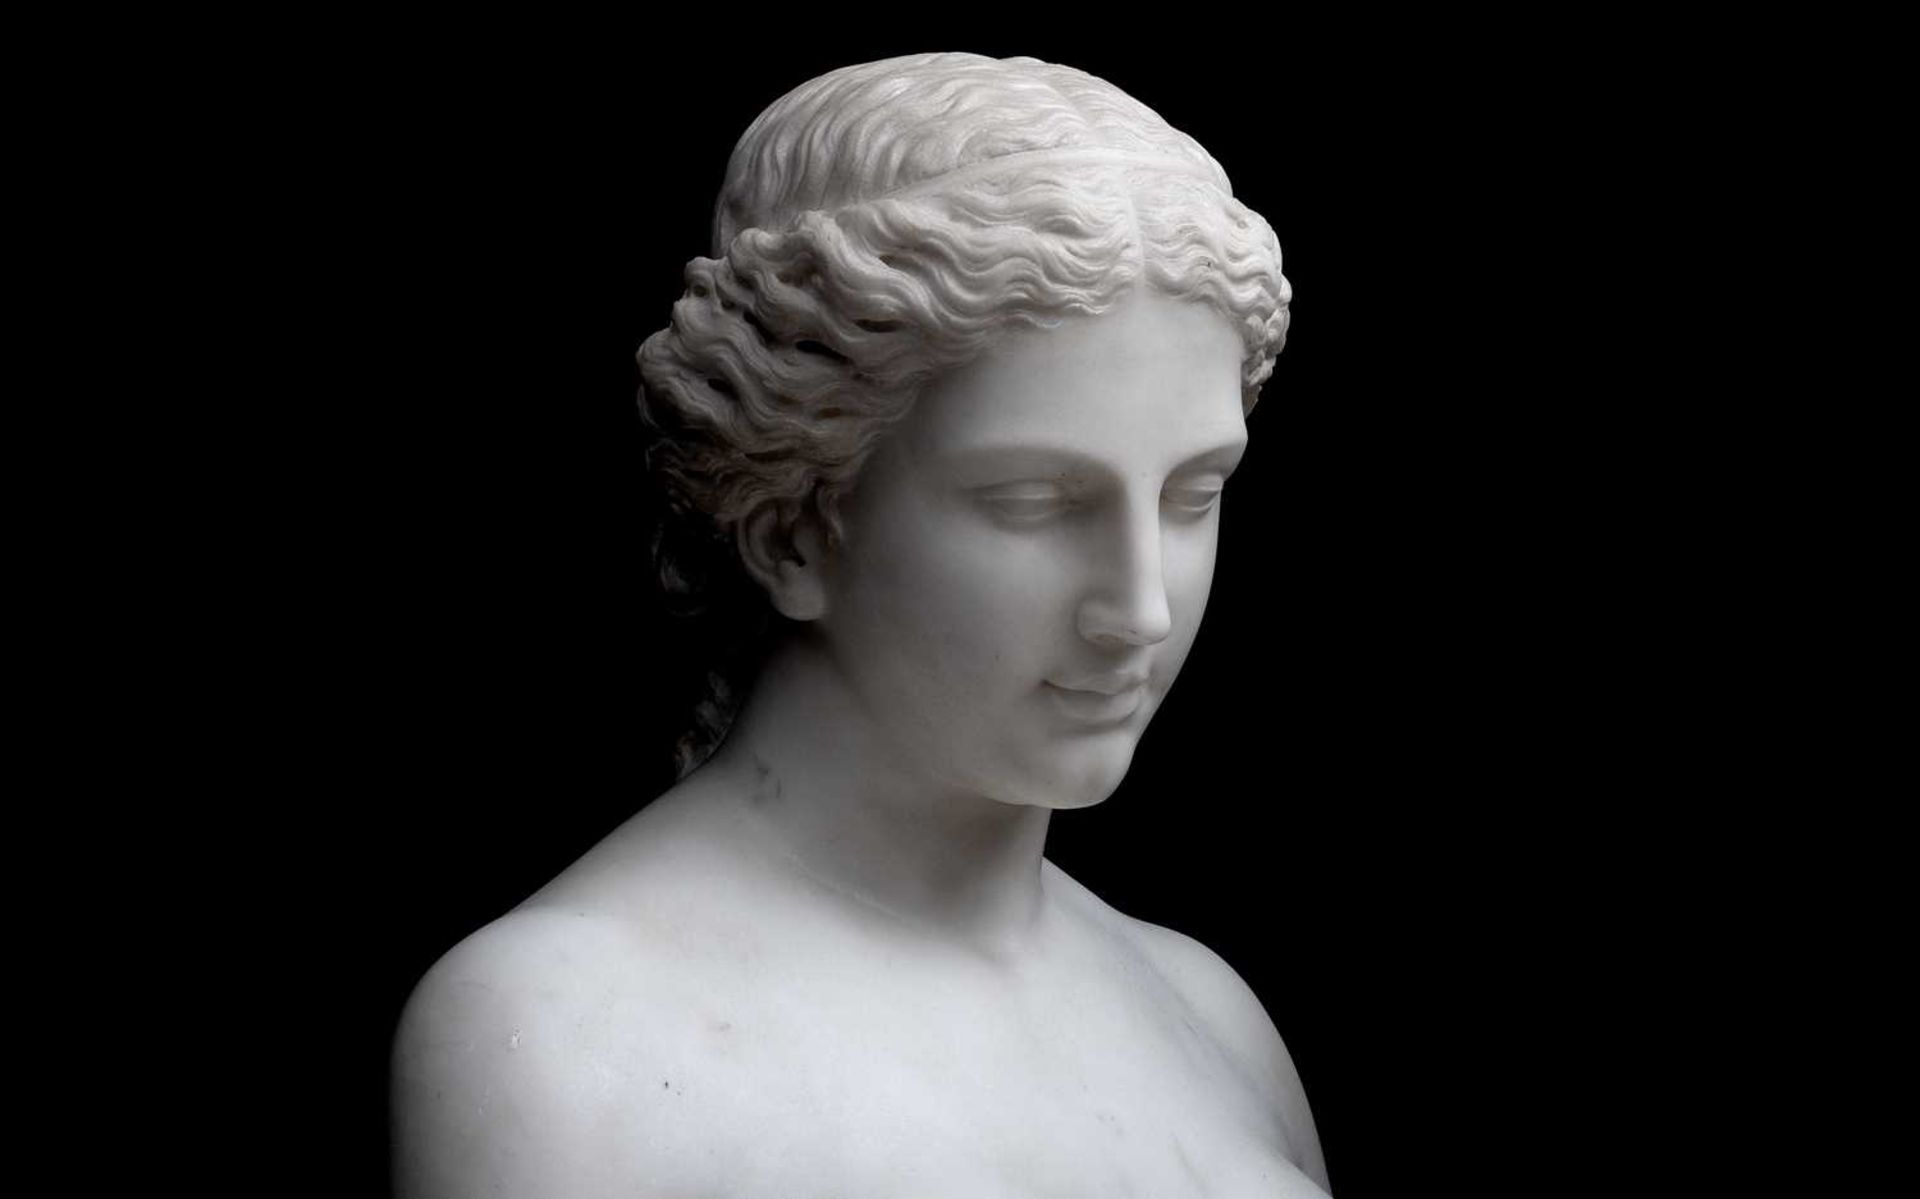 A 19TH CENTURY MARBLE BUST OF EVE, POSSIBLY BY HIRAM POWERS (AMERICAN, 1805-1873) - Image 2 of 8